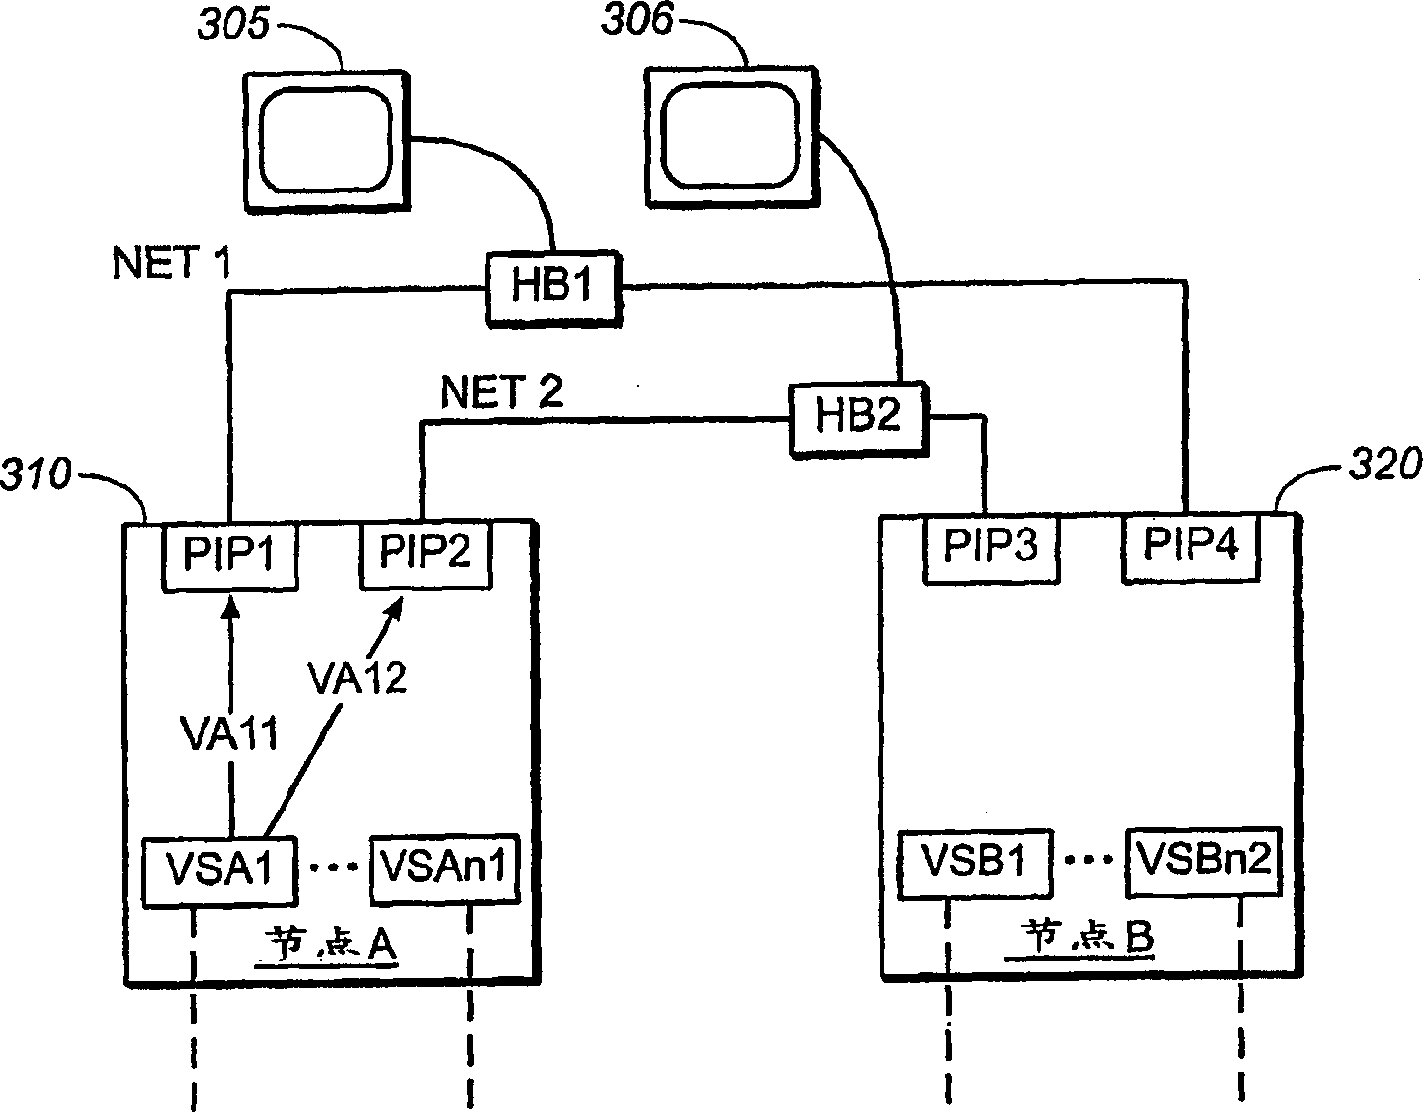 High-availability cluster virtual server system